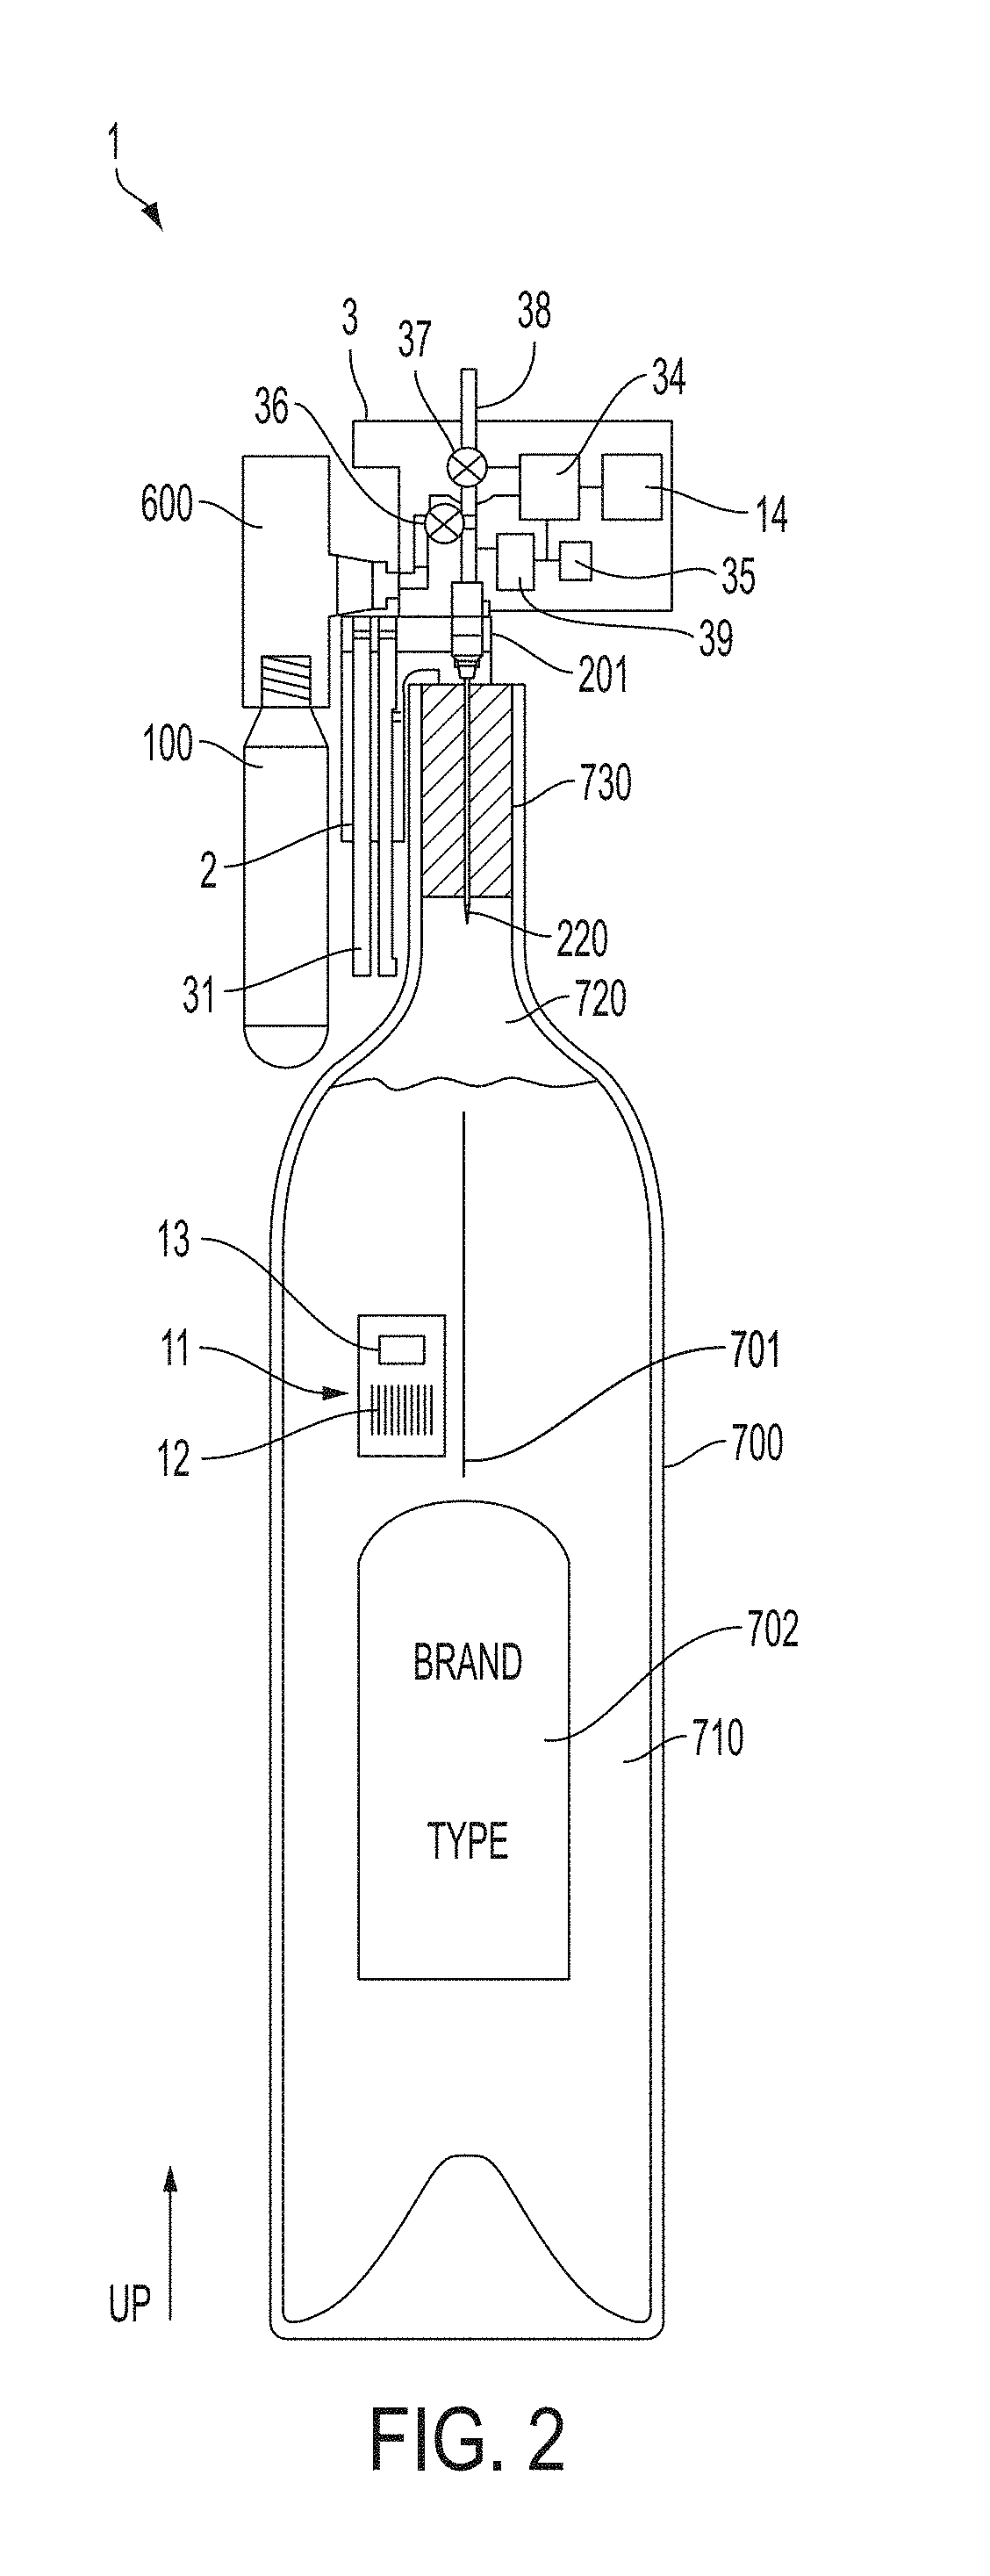 Beverage container identification and dispensing control